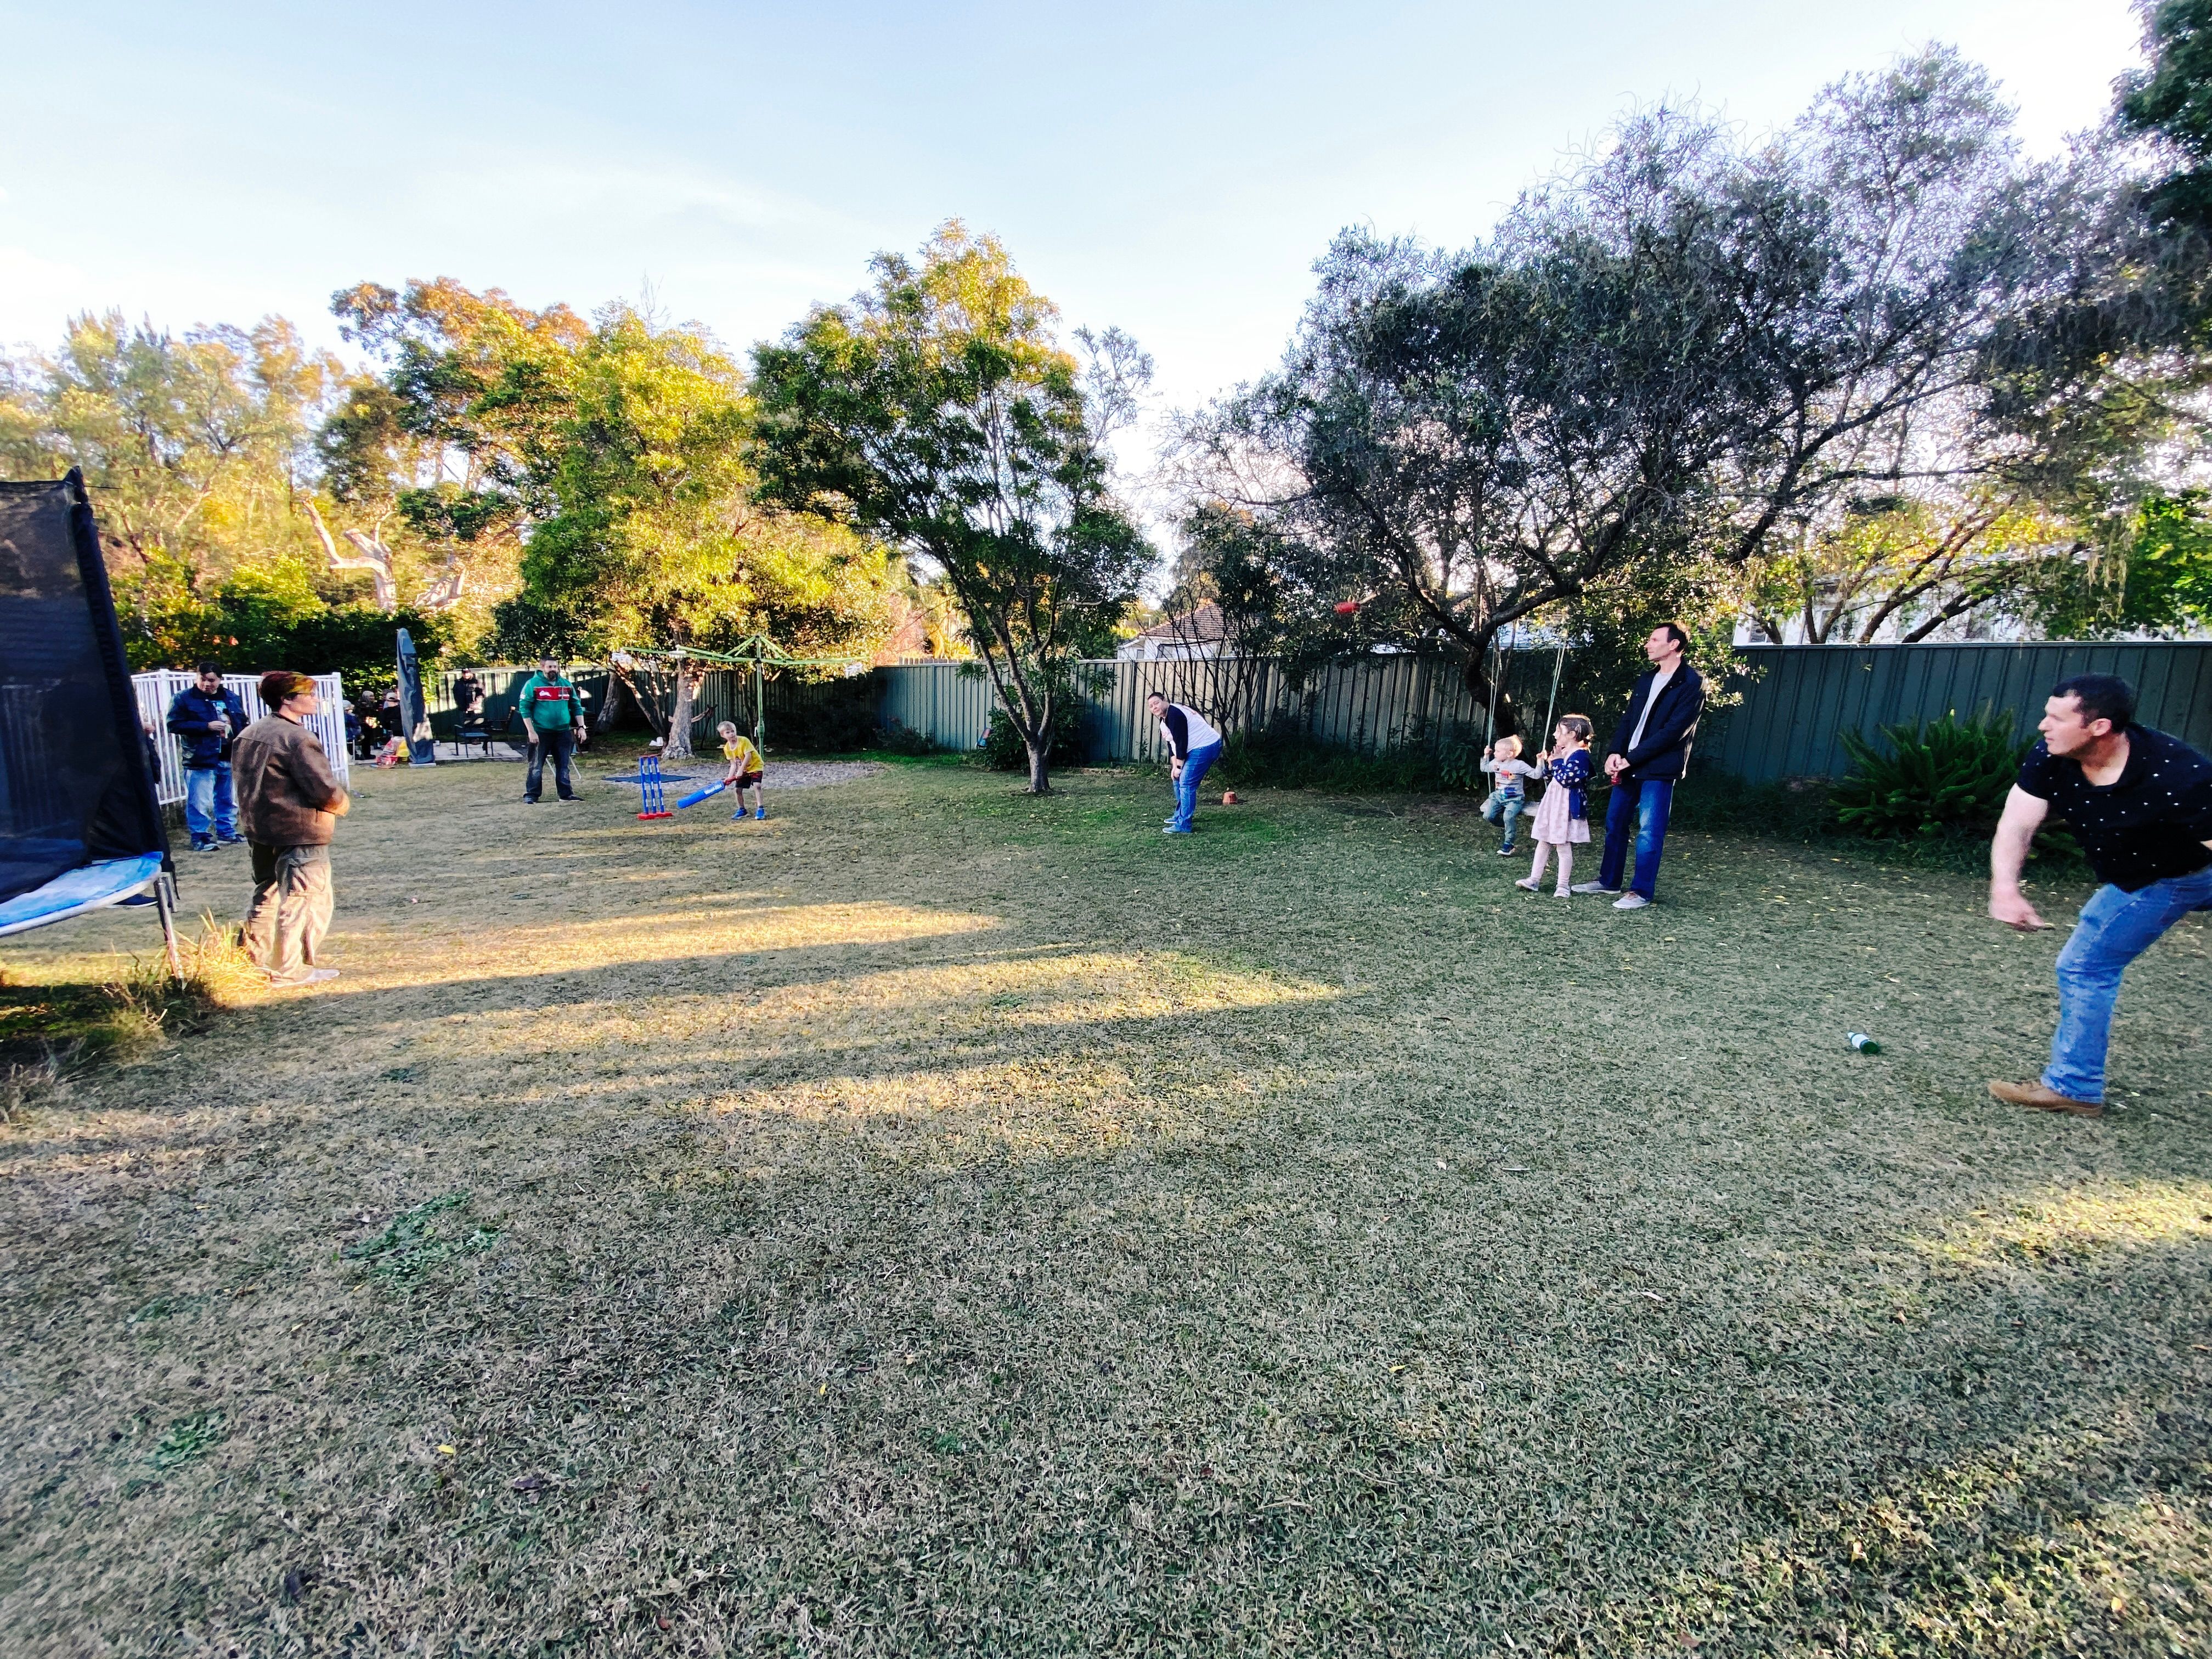 A photo of a grassy backyard with a set of plastic cricket stumps set up, a 6 year-old holding a plastic cricket bat, and a man mid-bowl just in frame at the right. There's a number of other adults and children standing around fielding and just generally watching.